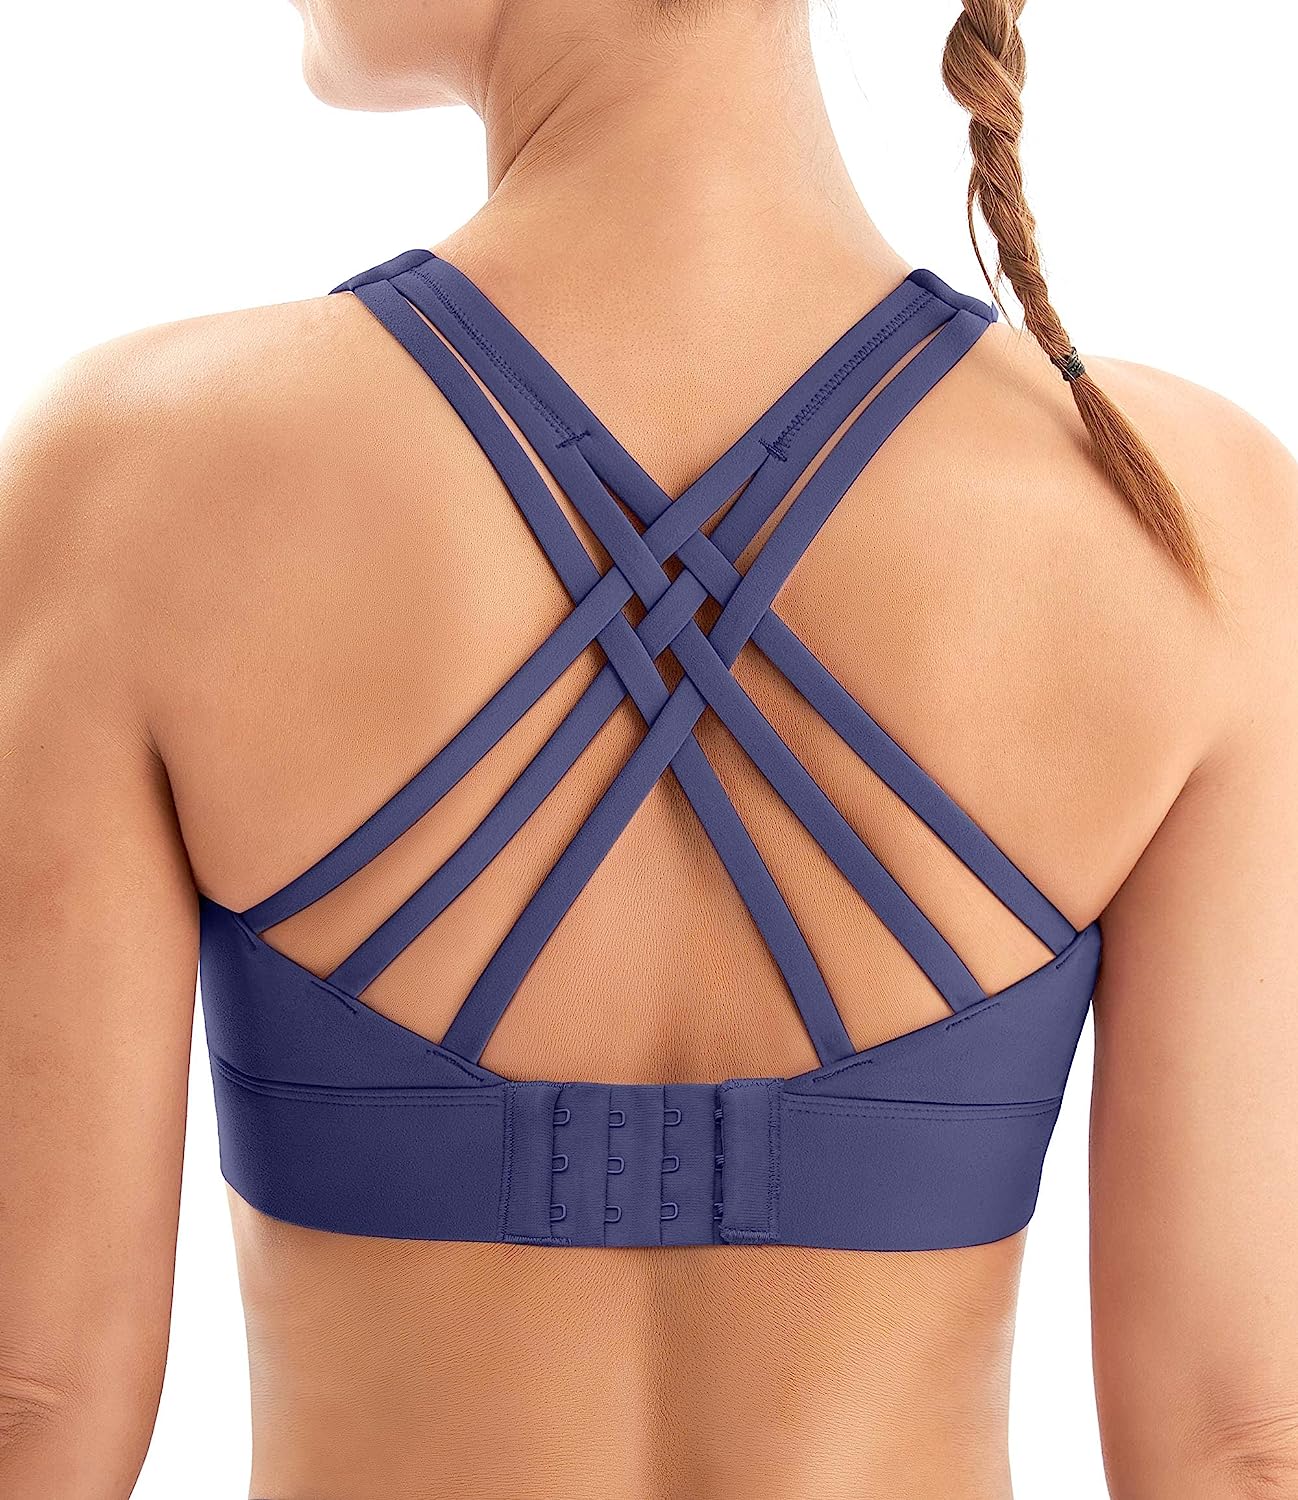 17 of the Best Sports Bras For Big Busts  Best sports bras, High impact  sports bra, Sports bra